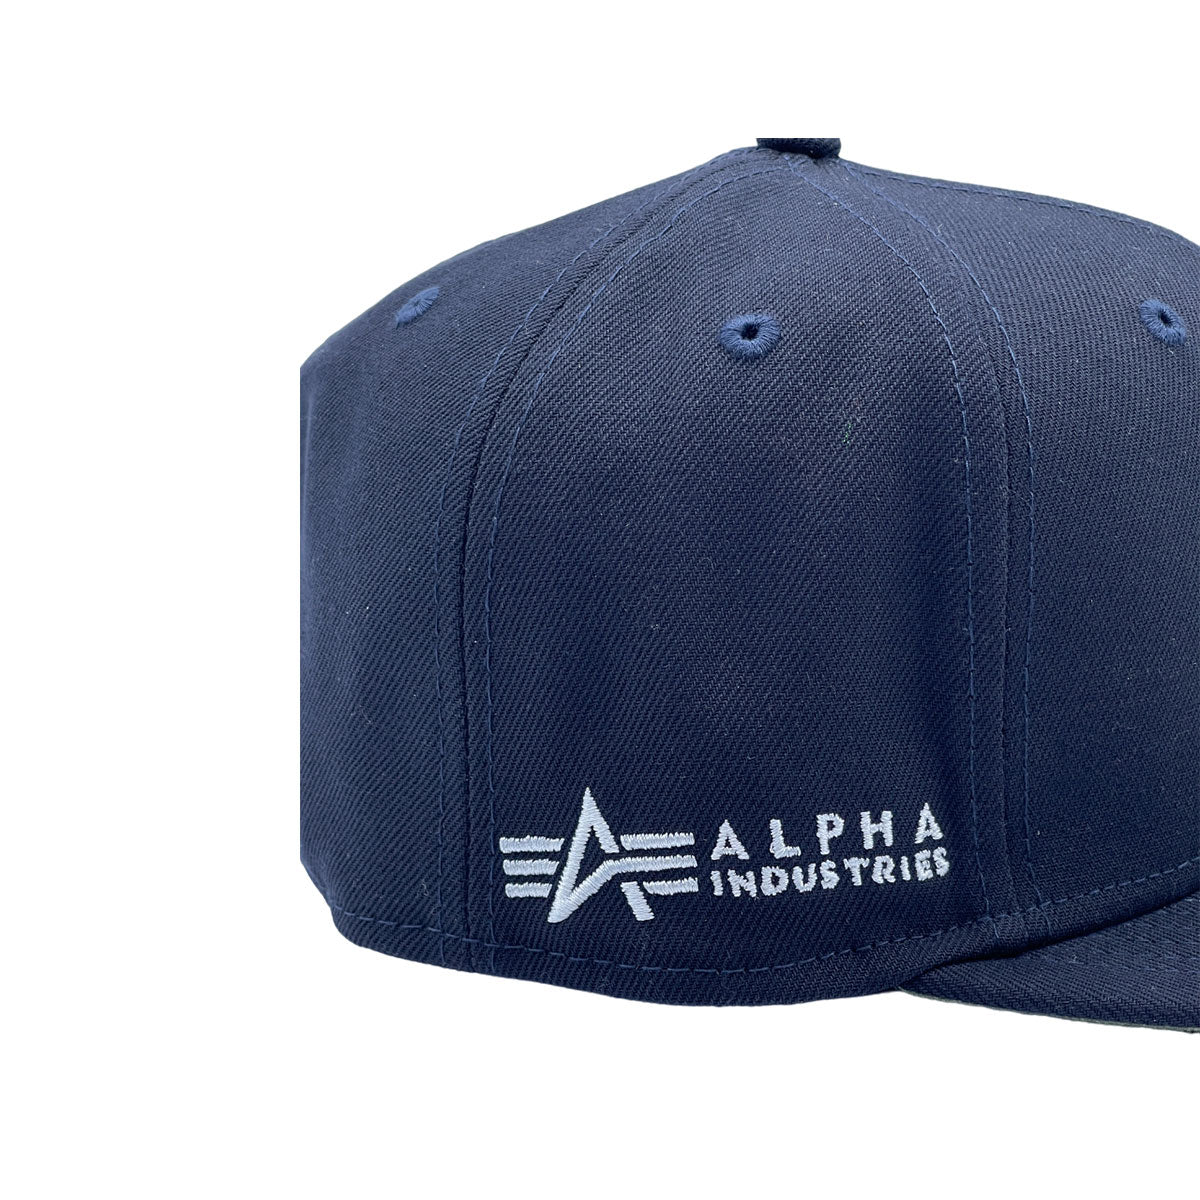 Alpha Industries x New Era 59Fifty New York Yankees Fitted Hat